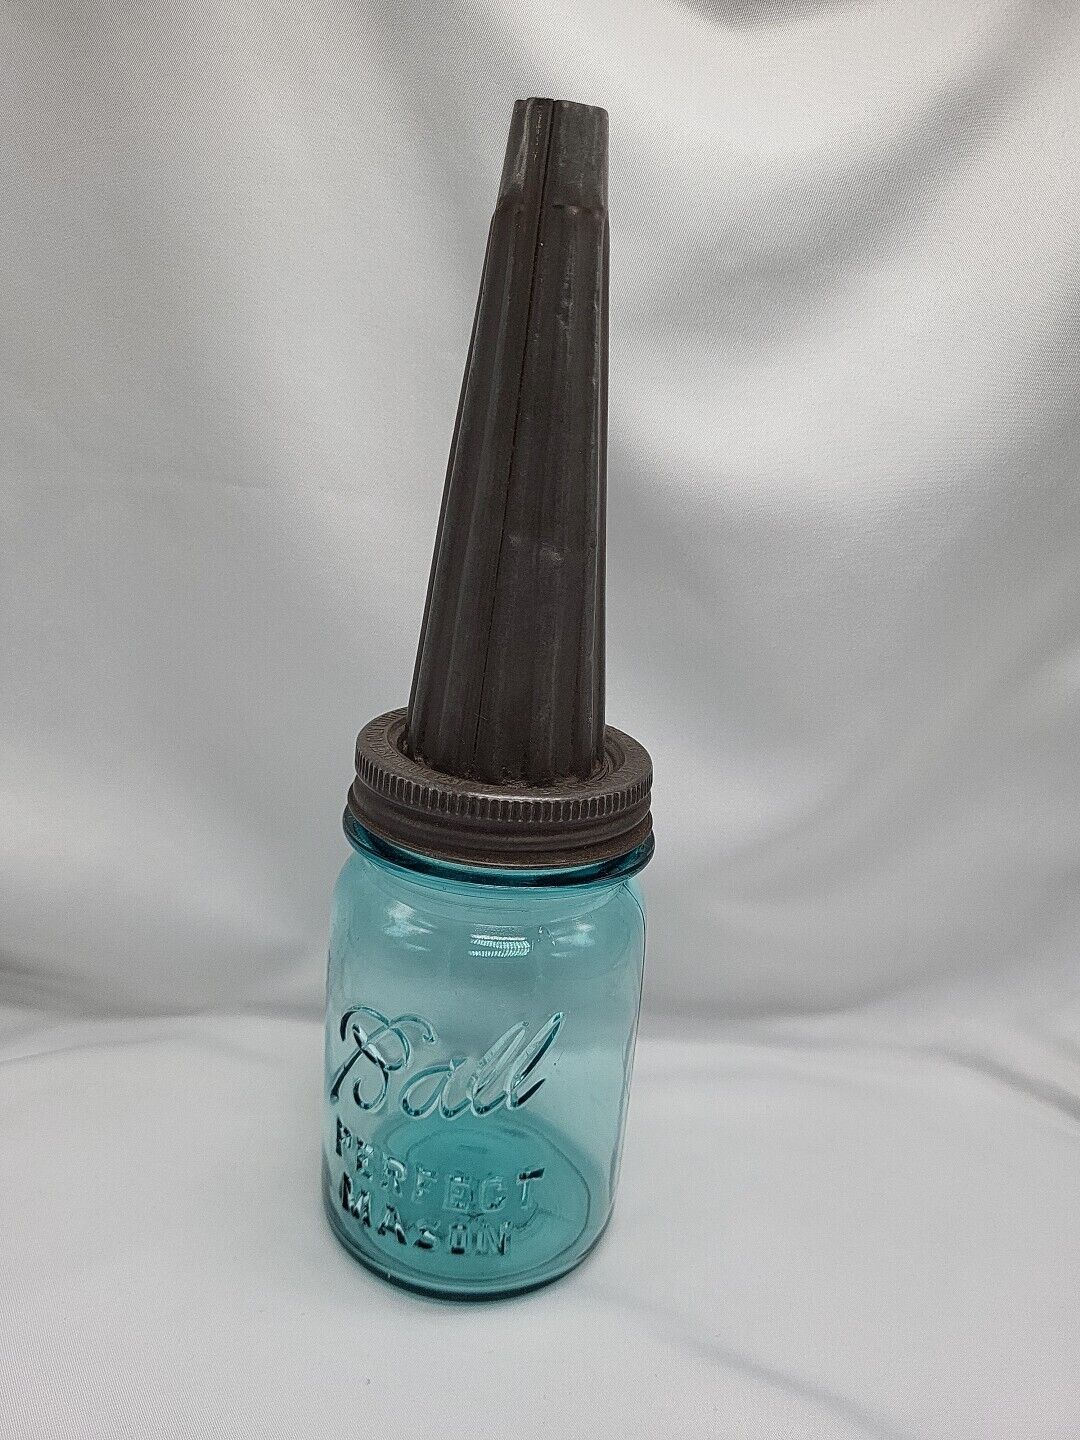 Vintage Dover 80 Oil Spout With Blue Ball Perfect Mason Jar